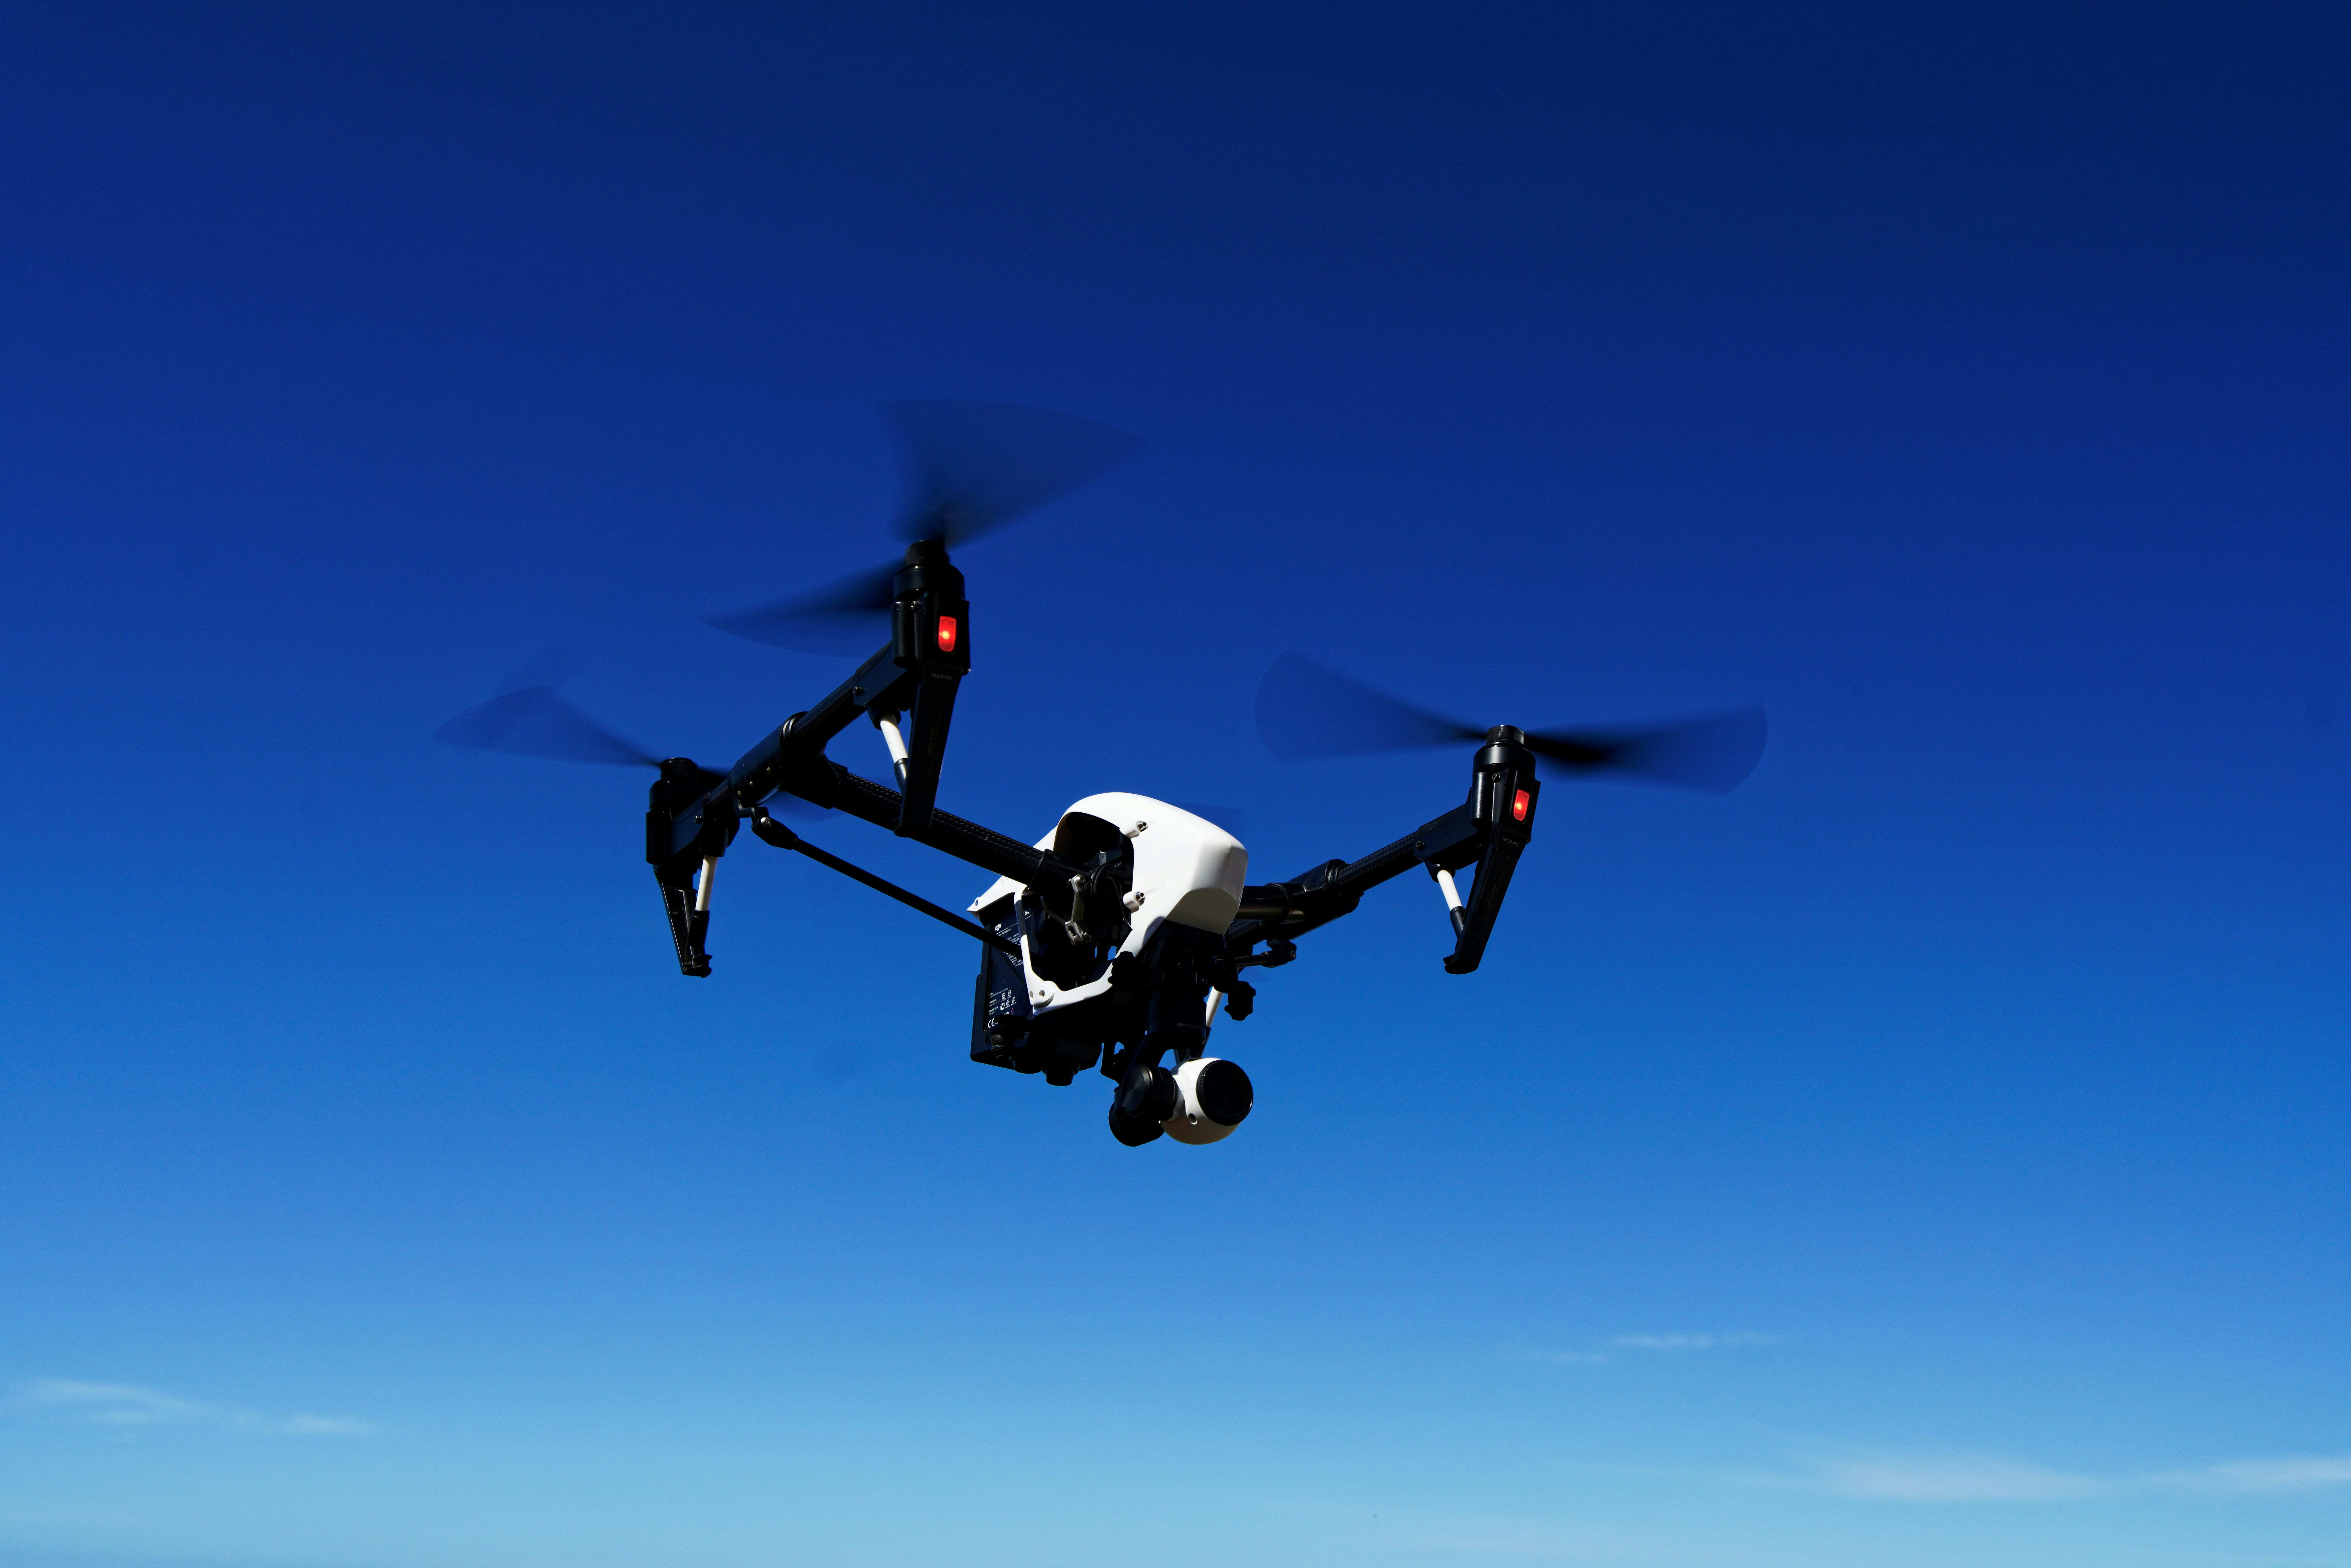 The high performance DJI Inspire 1.2 UAV flying in a blue sky with the landing gear up in flying position. 